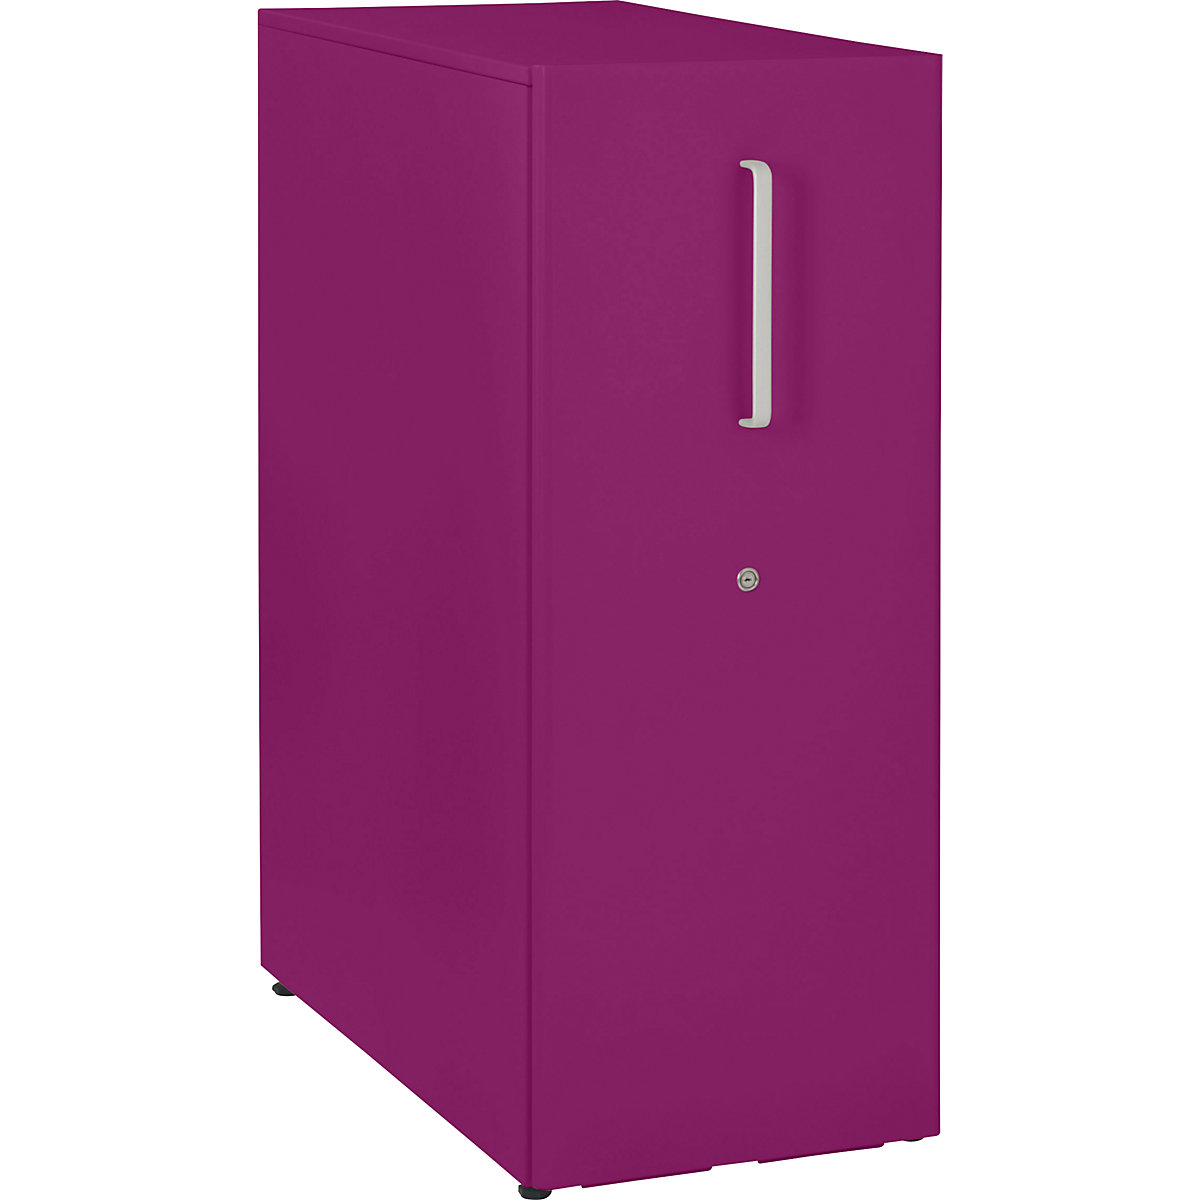 Tower™ 3 add-on furniture, with worktop, 1 pin board – BISLEY, for the left side, 1 shelf, fuchsia-24